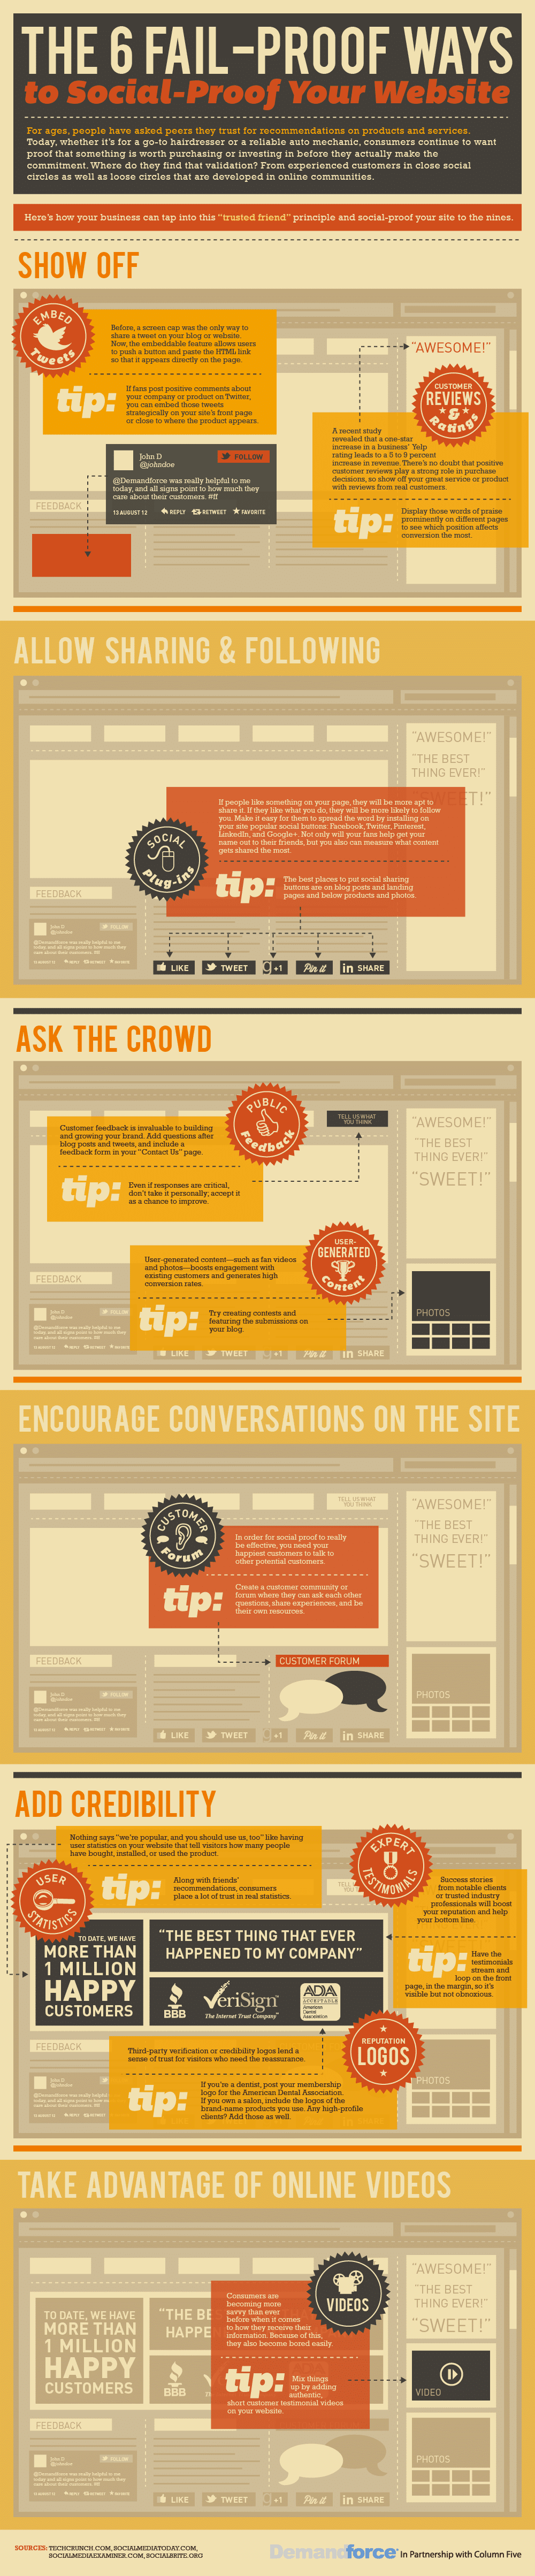 social-proof-website-tips-infographic